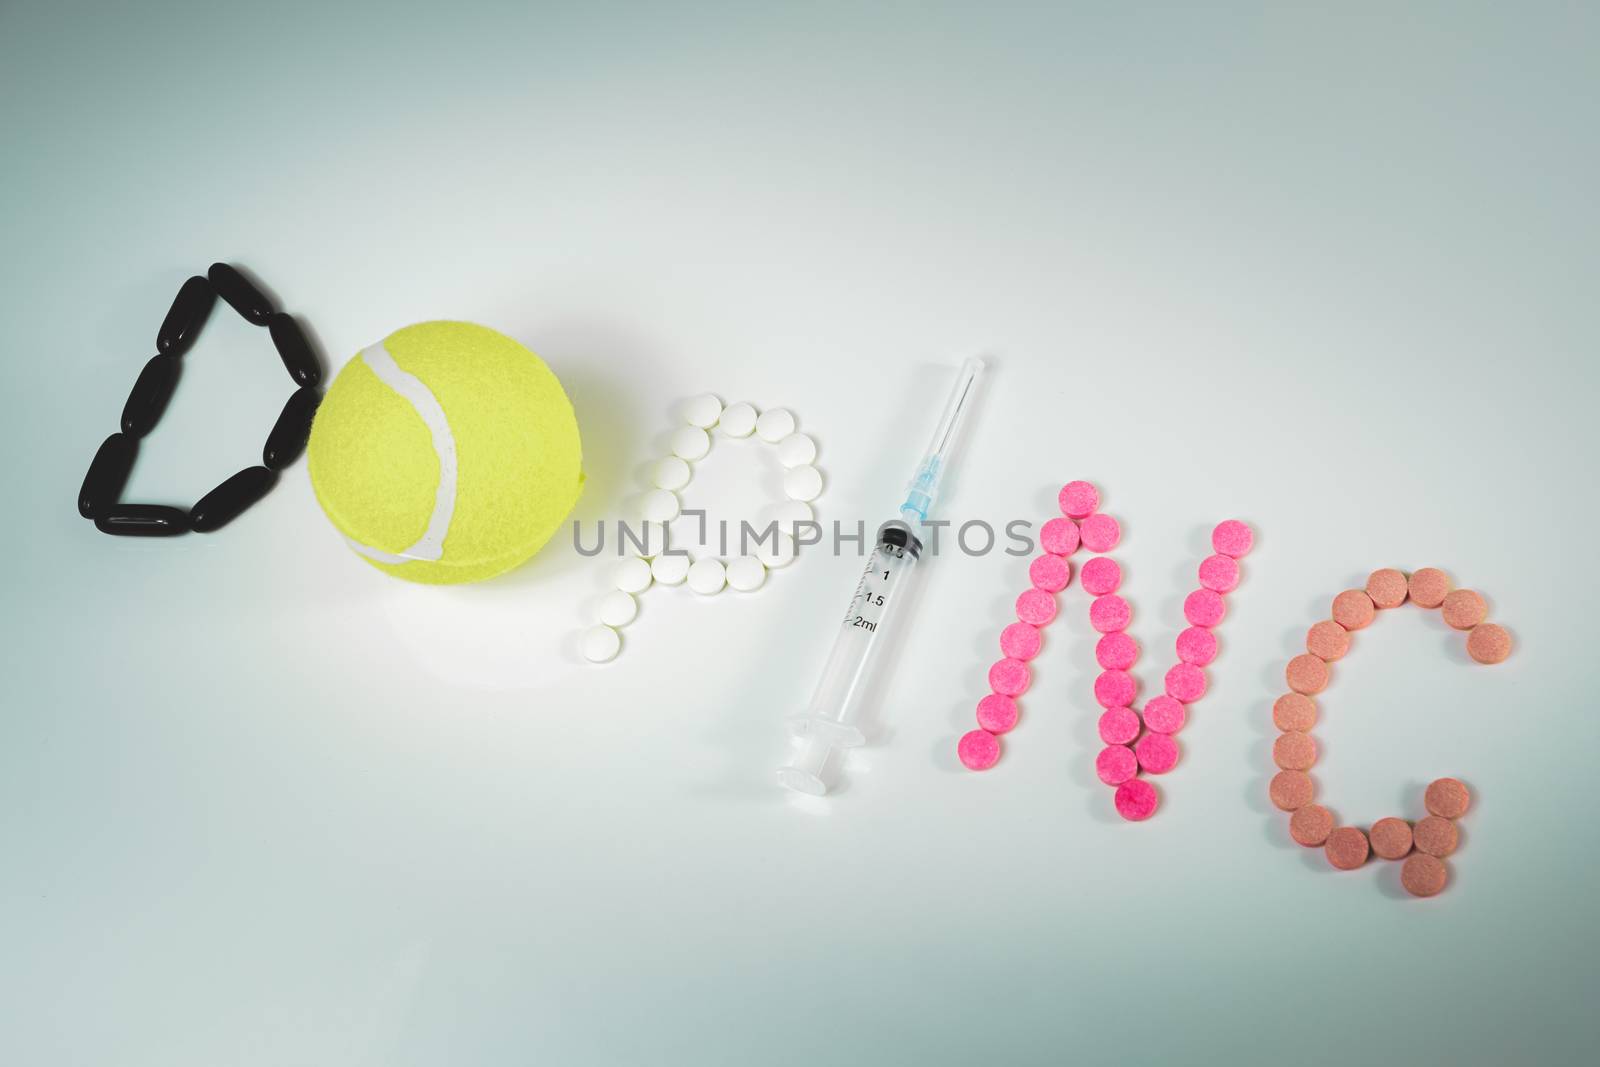 "Doping" word made of pills, tablets, syringe and a tennis ball. Concept of drugs in sports